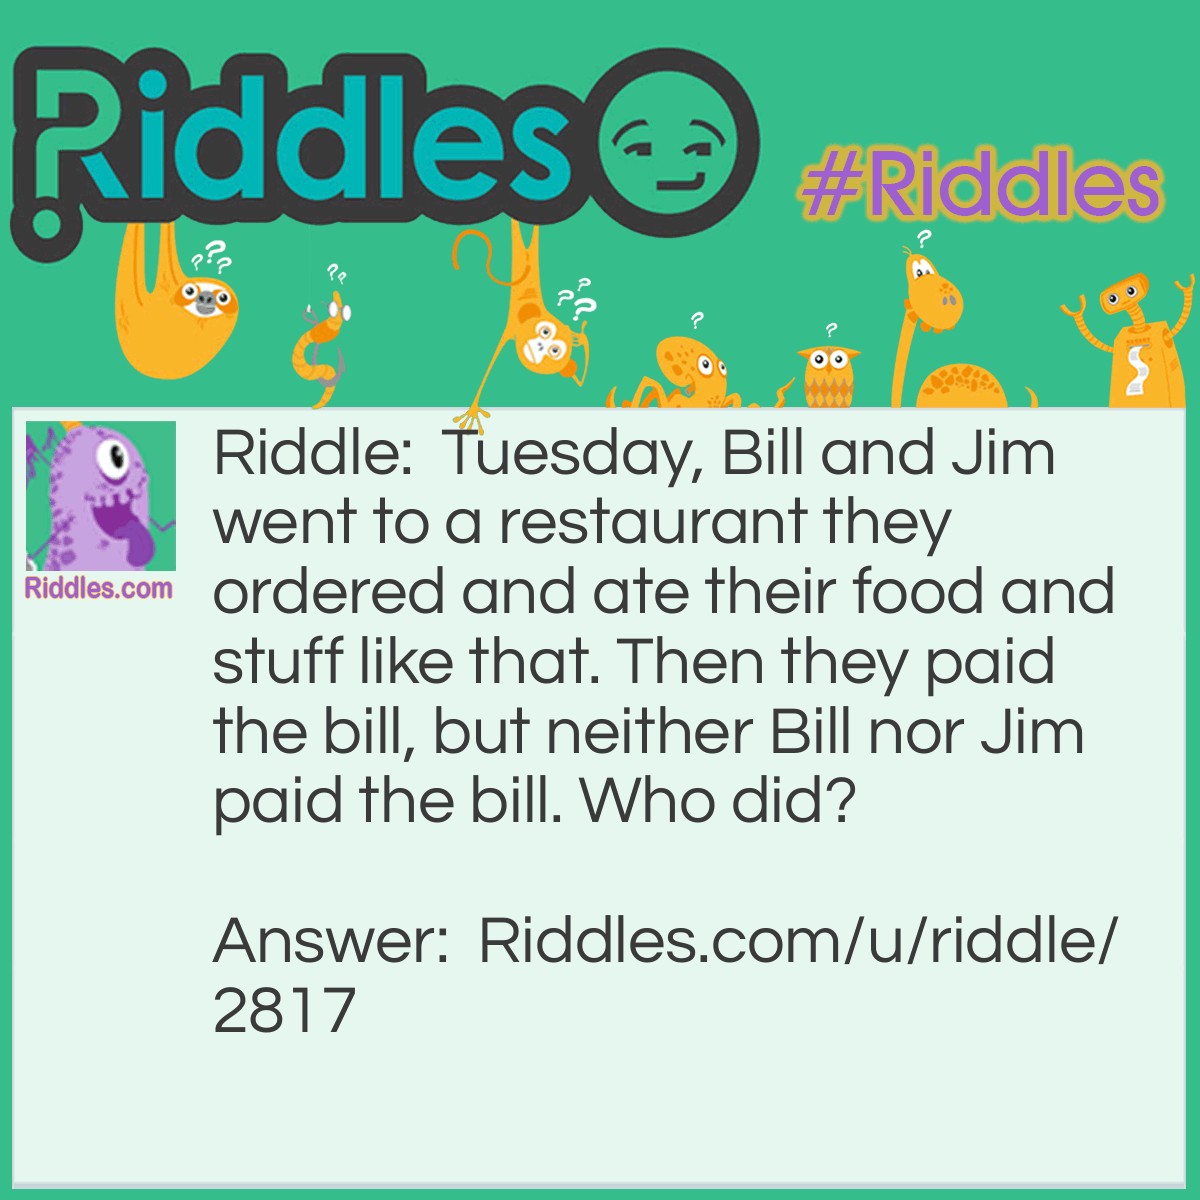 Riddle: Tuesday, Bill and Jim went to a restaurant they ordered and ate their food and stuff like that. Then they paid the bill, but neither Bill nor Jim paid the bill. Who did? Answer: Tuesday did because in english to say a day you say "on" before the day!!!